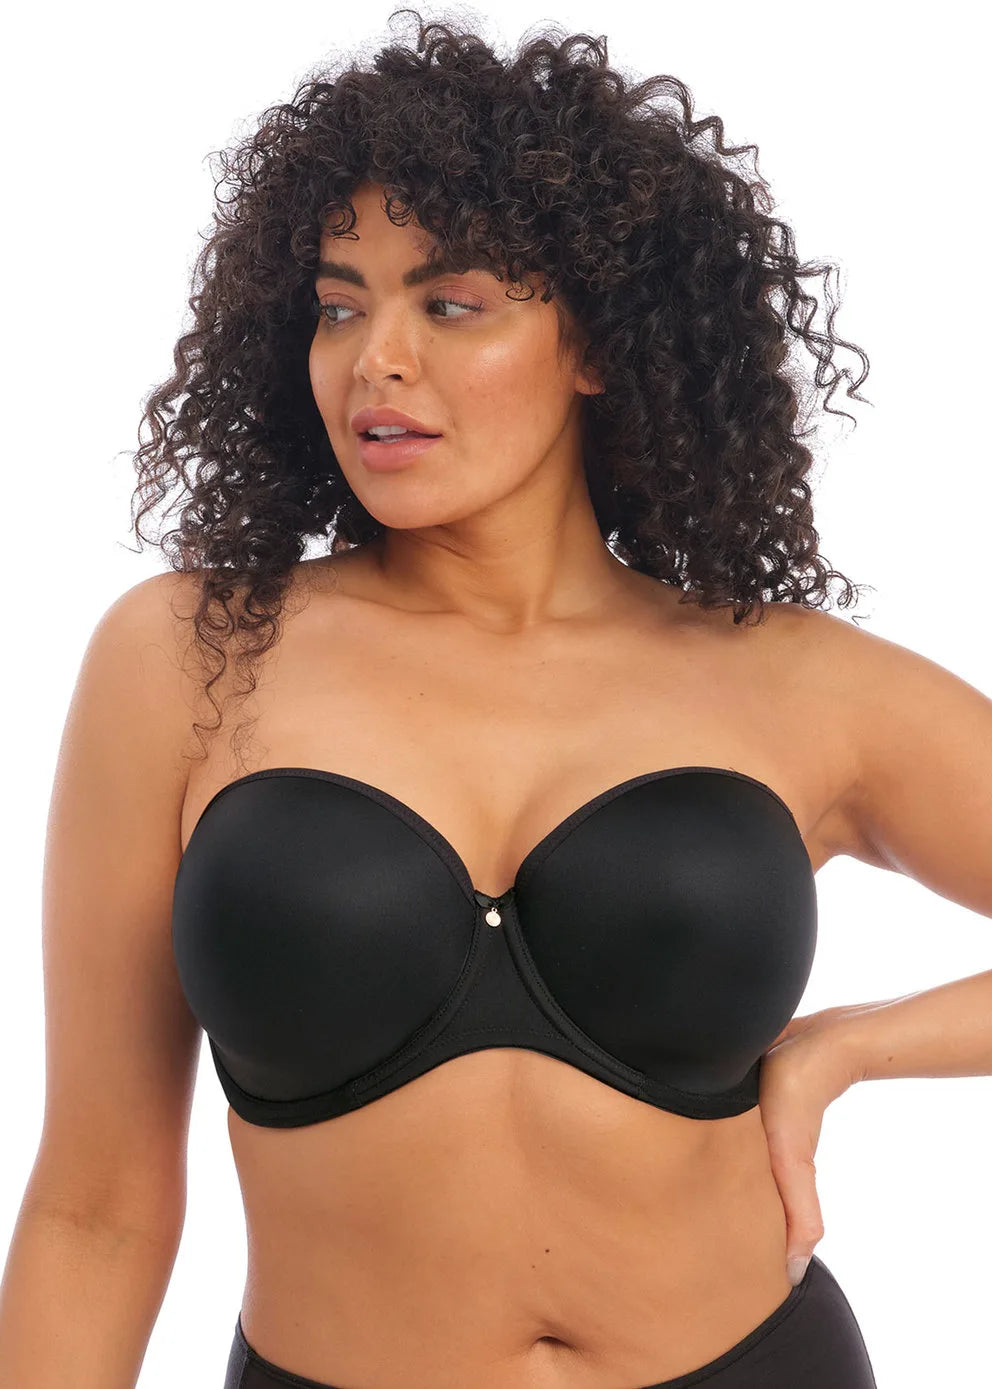 SMOOTH Molded Strapless Bra from Elomi at Belle Lacet Lingerie.